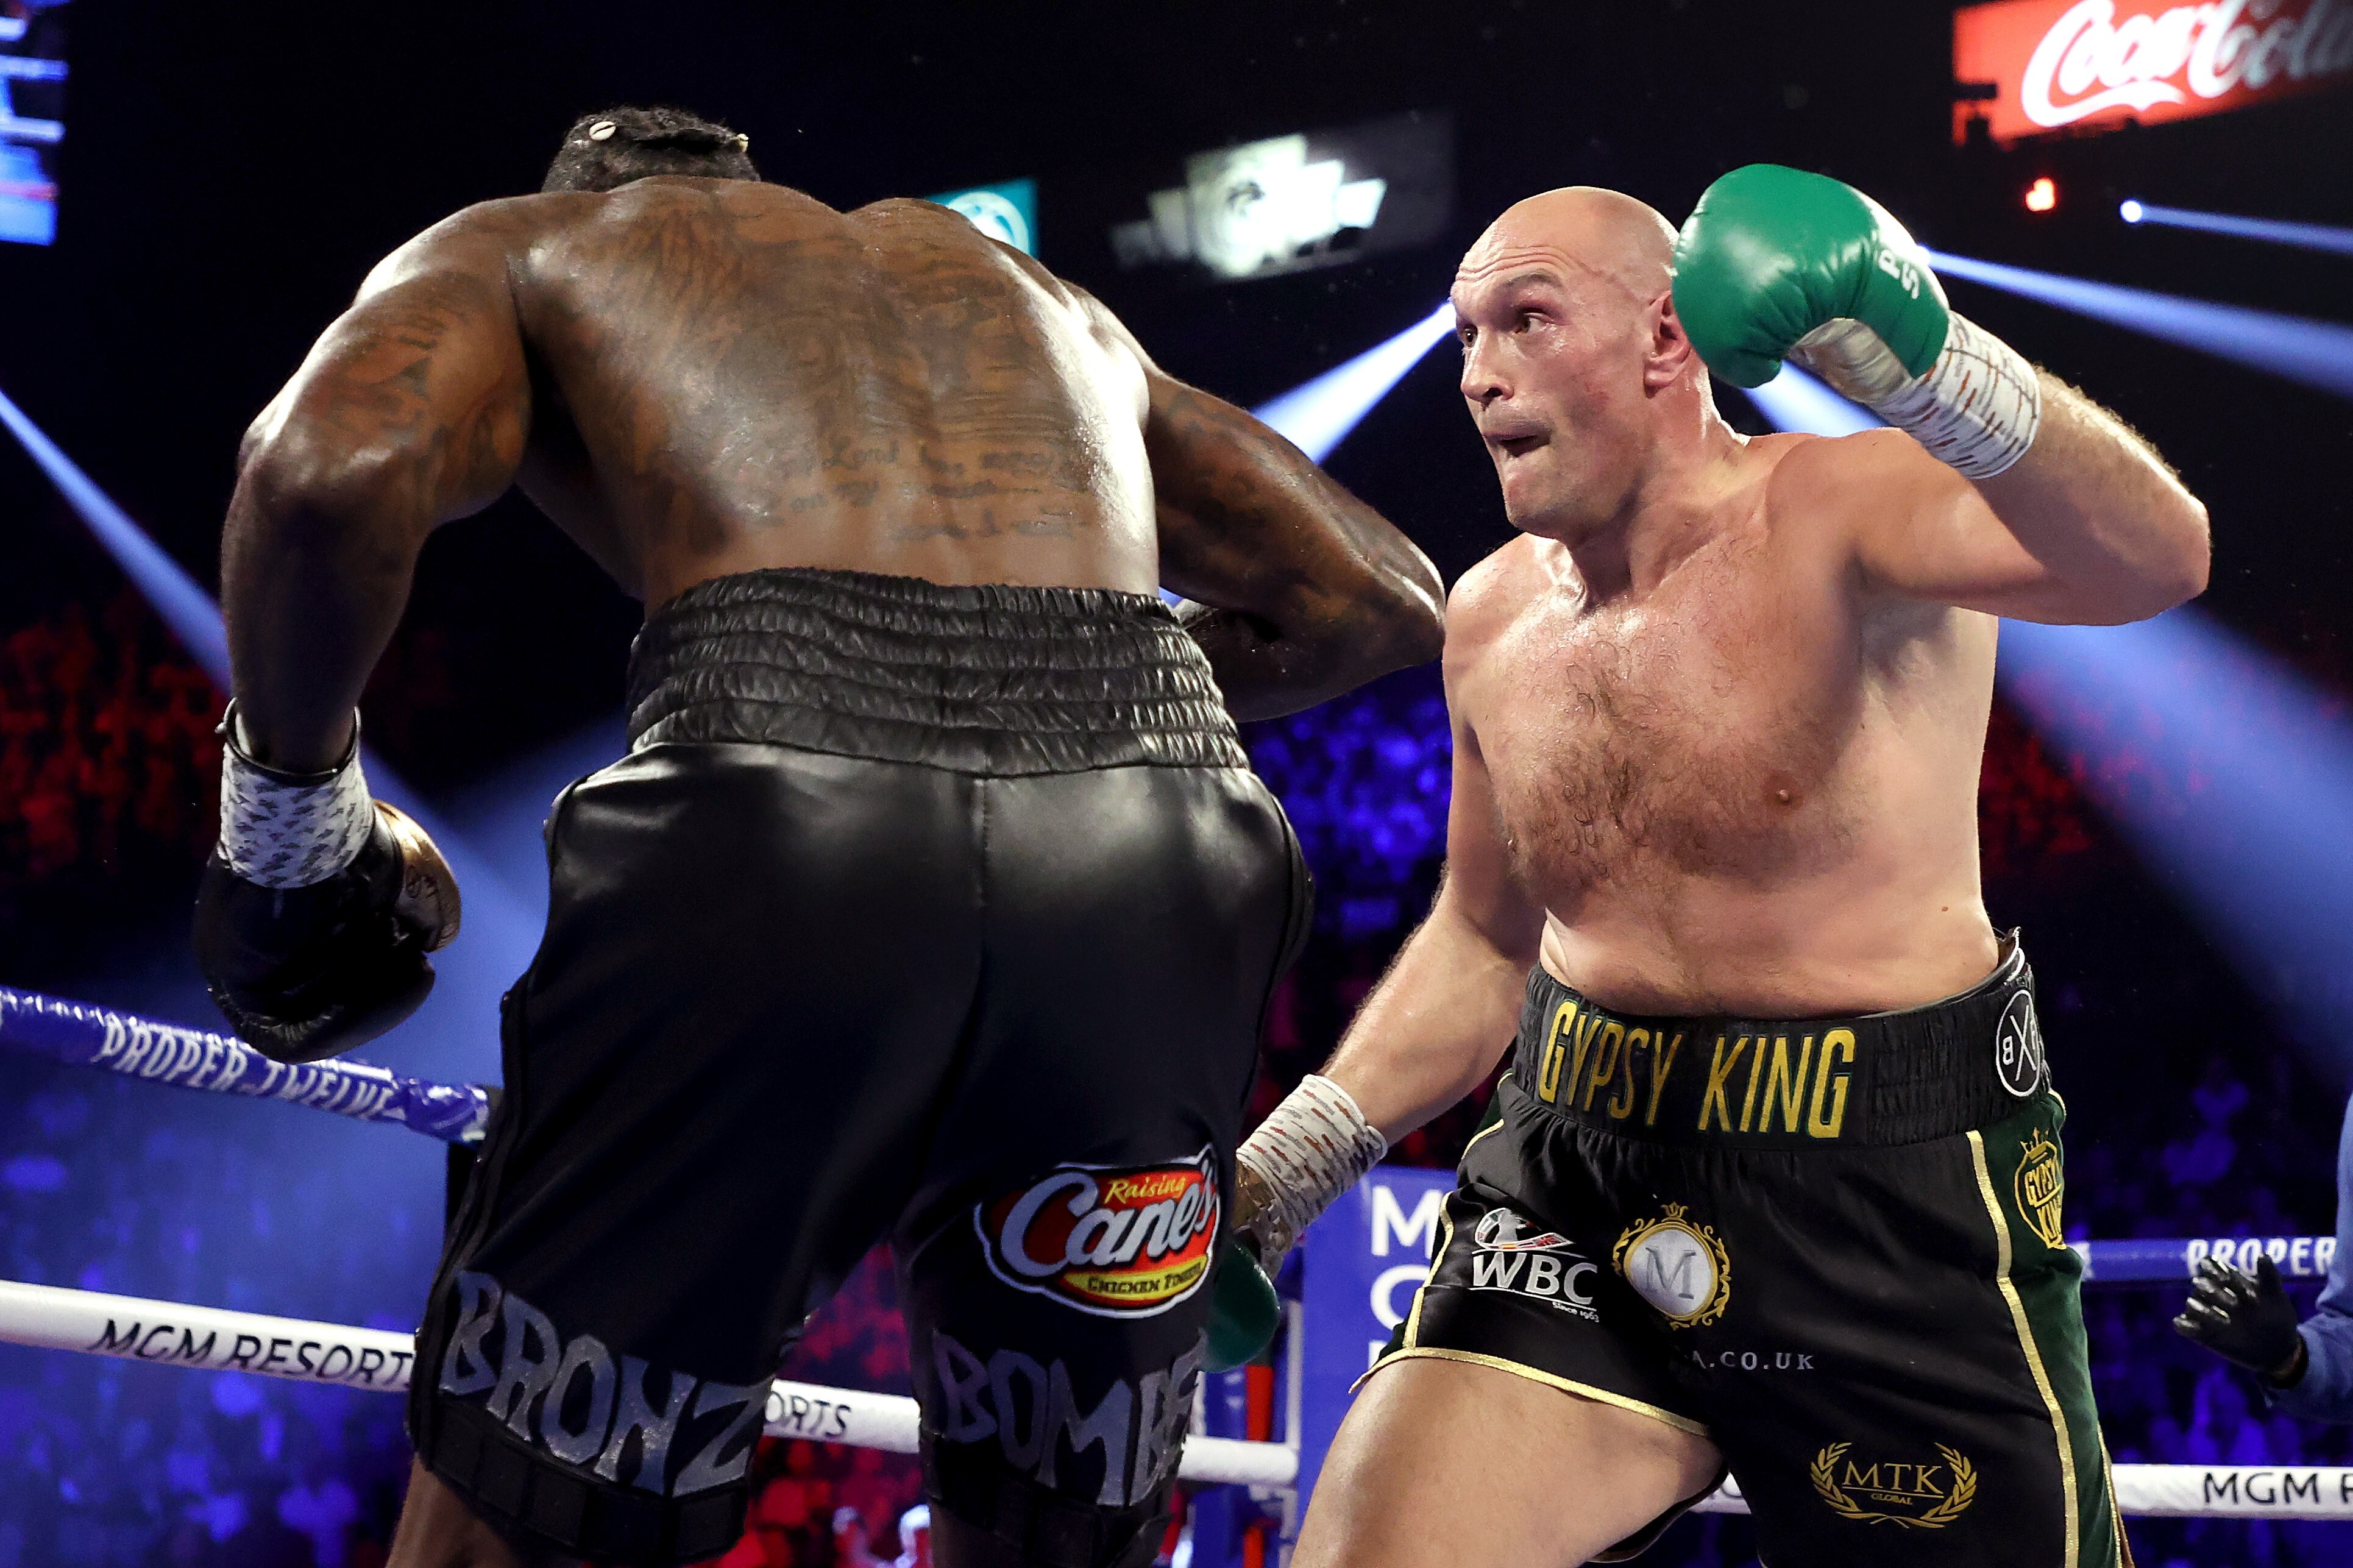 Tyson Fury says he is wary of the danger Deontay Wilder represents. Photo: Al Bello/Getty Images